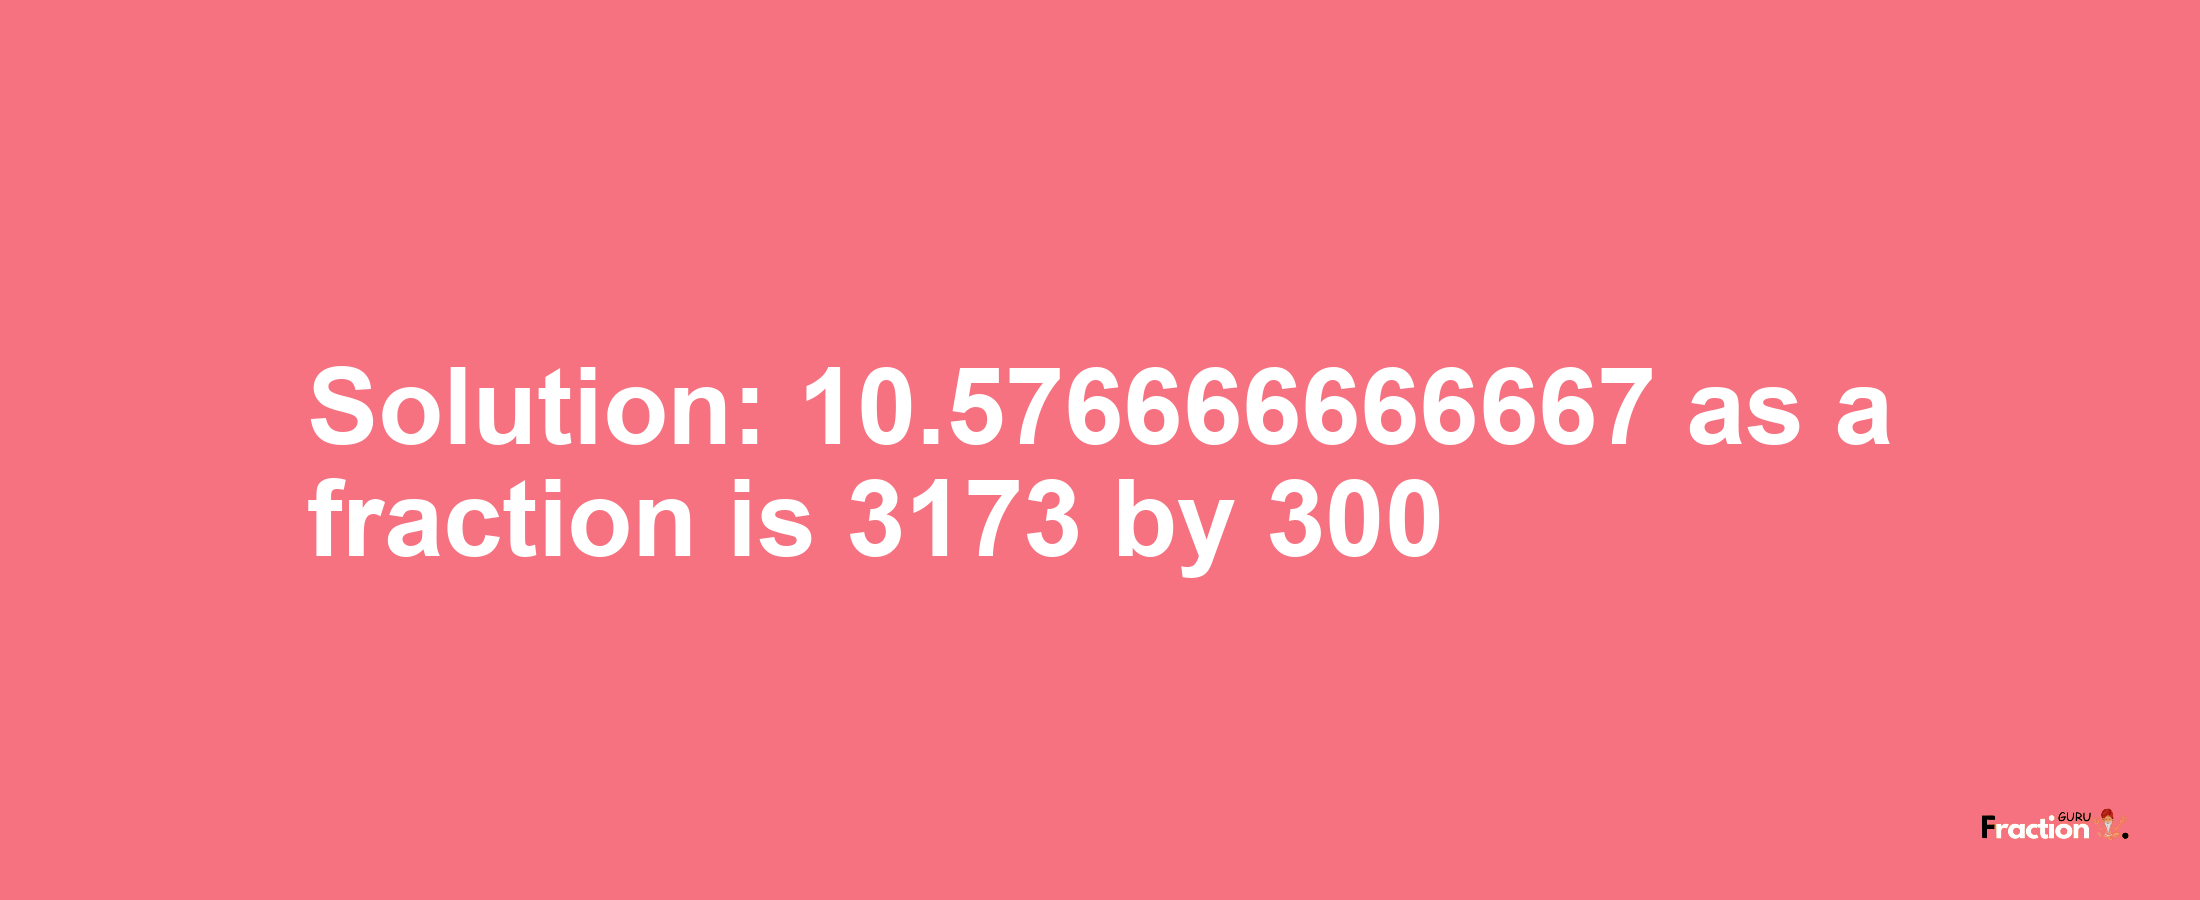 Solution:10.576666666667 as a fraction is 3173/300